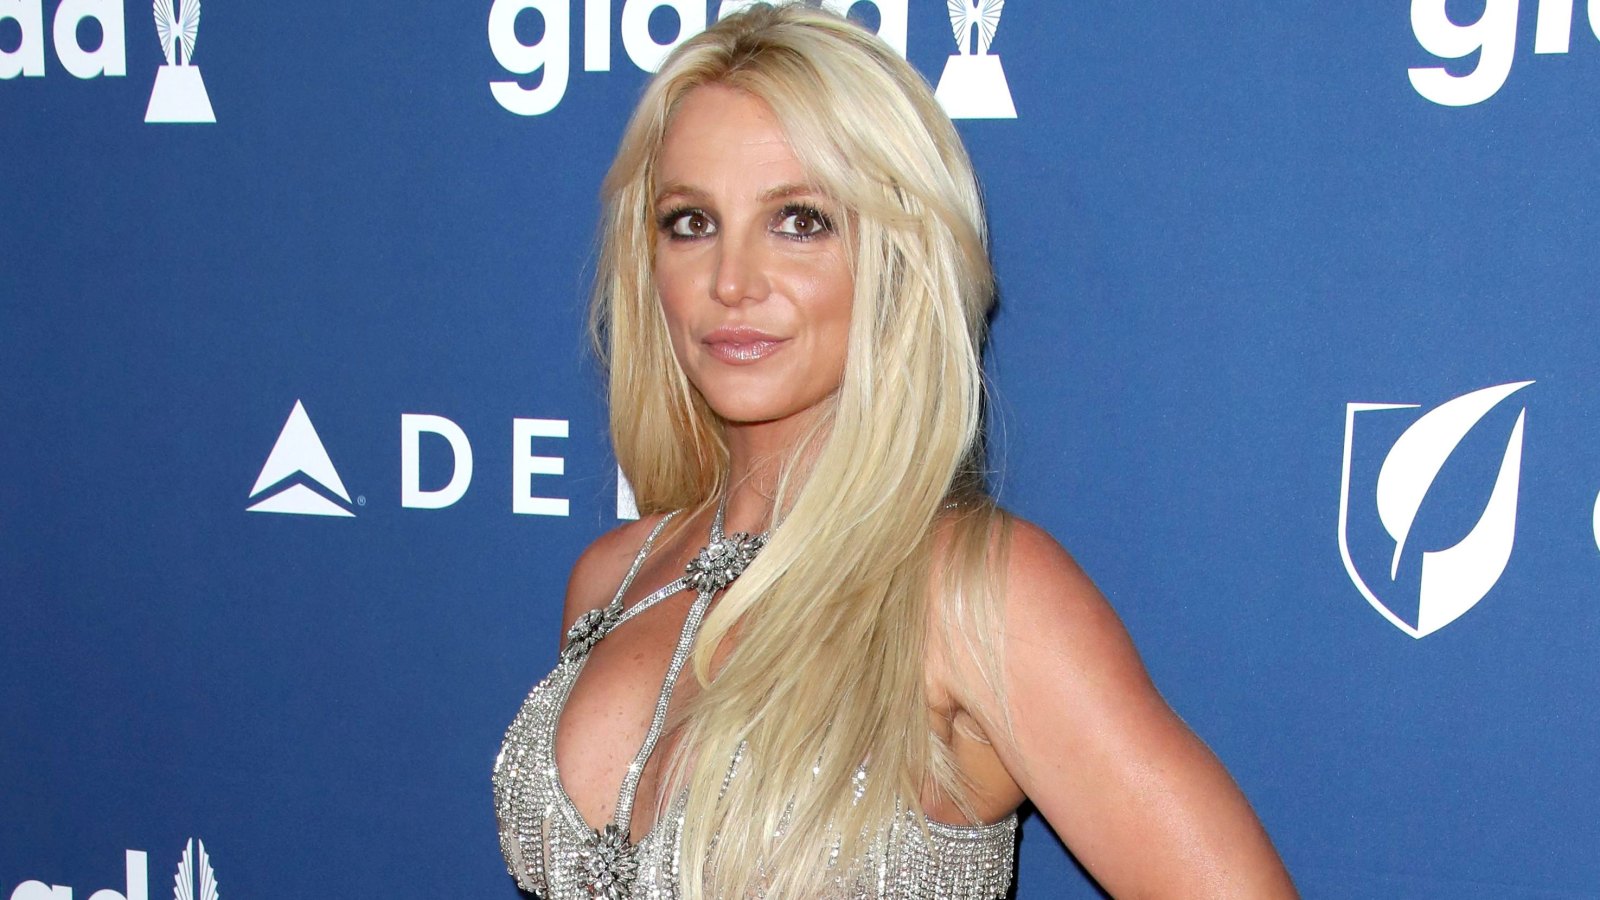 Britney Spears Says It's 'Hard to Share' on Social Media Because People 'Say the Meanest Things'